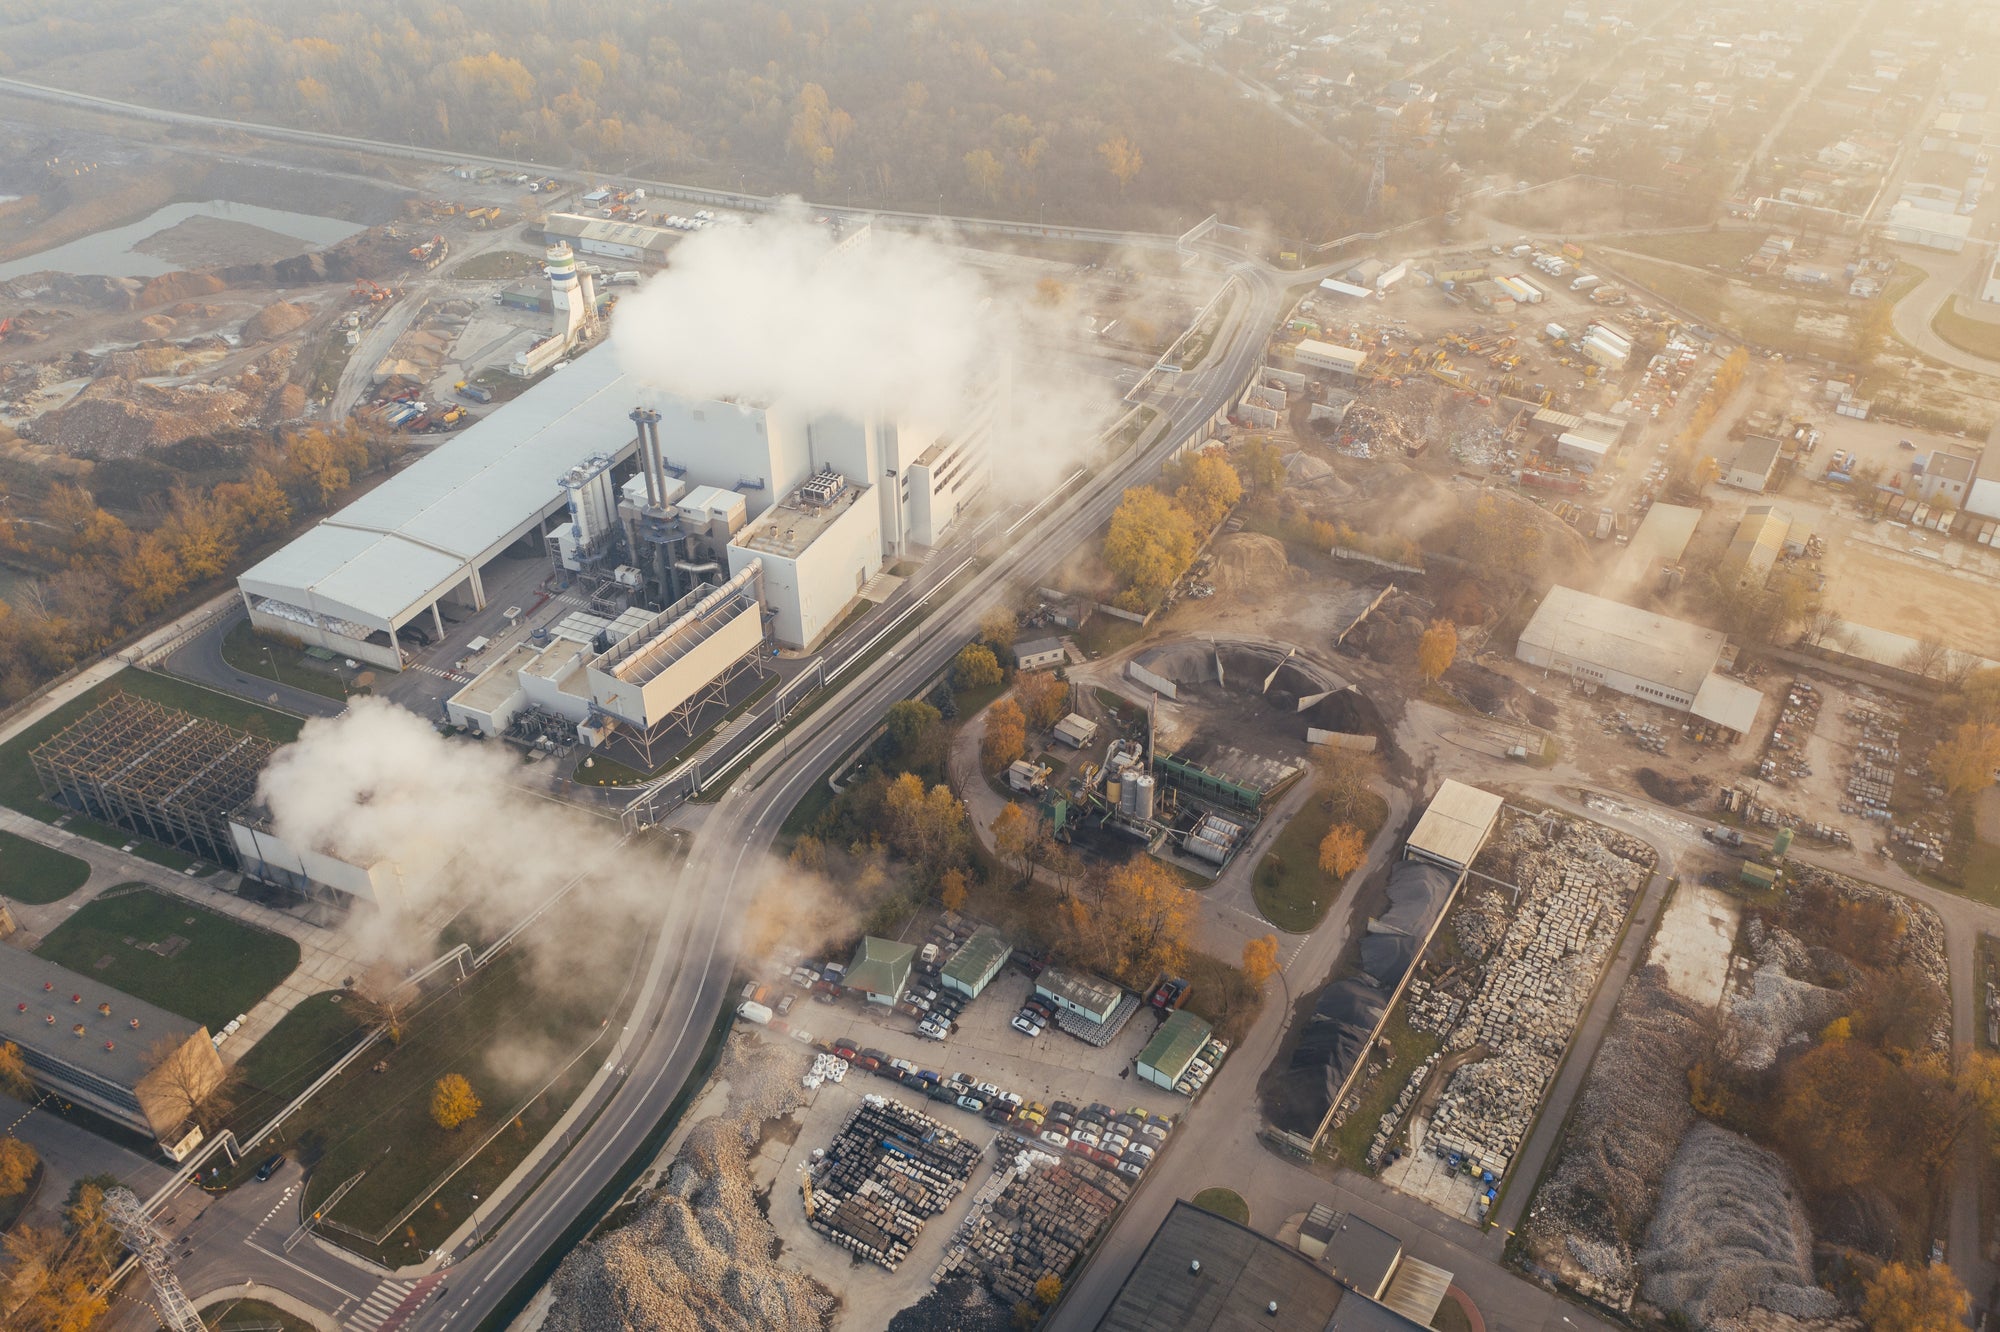 Factories emit smoke and toxic chemicals into the air, contributing to air pollution and potential health hazards for nearby communities.